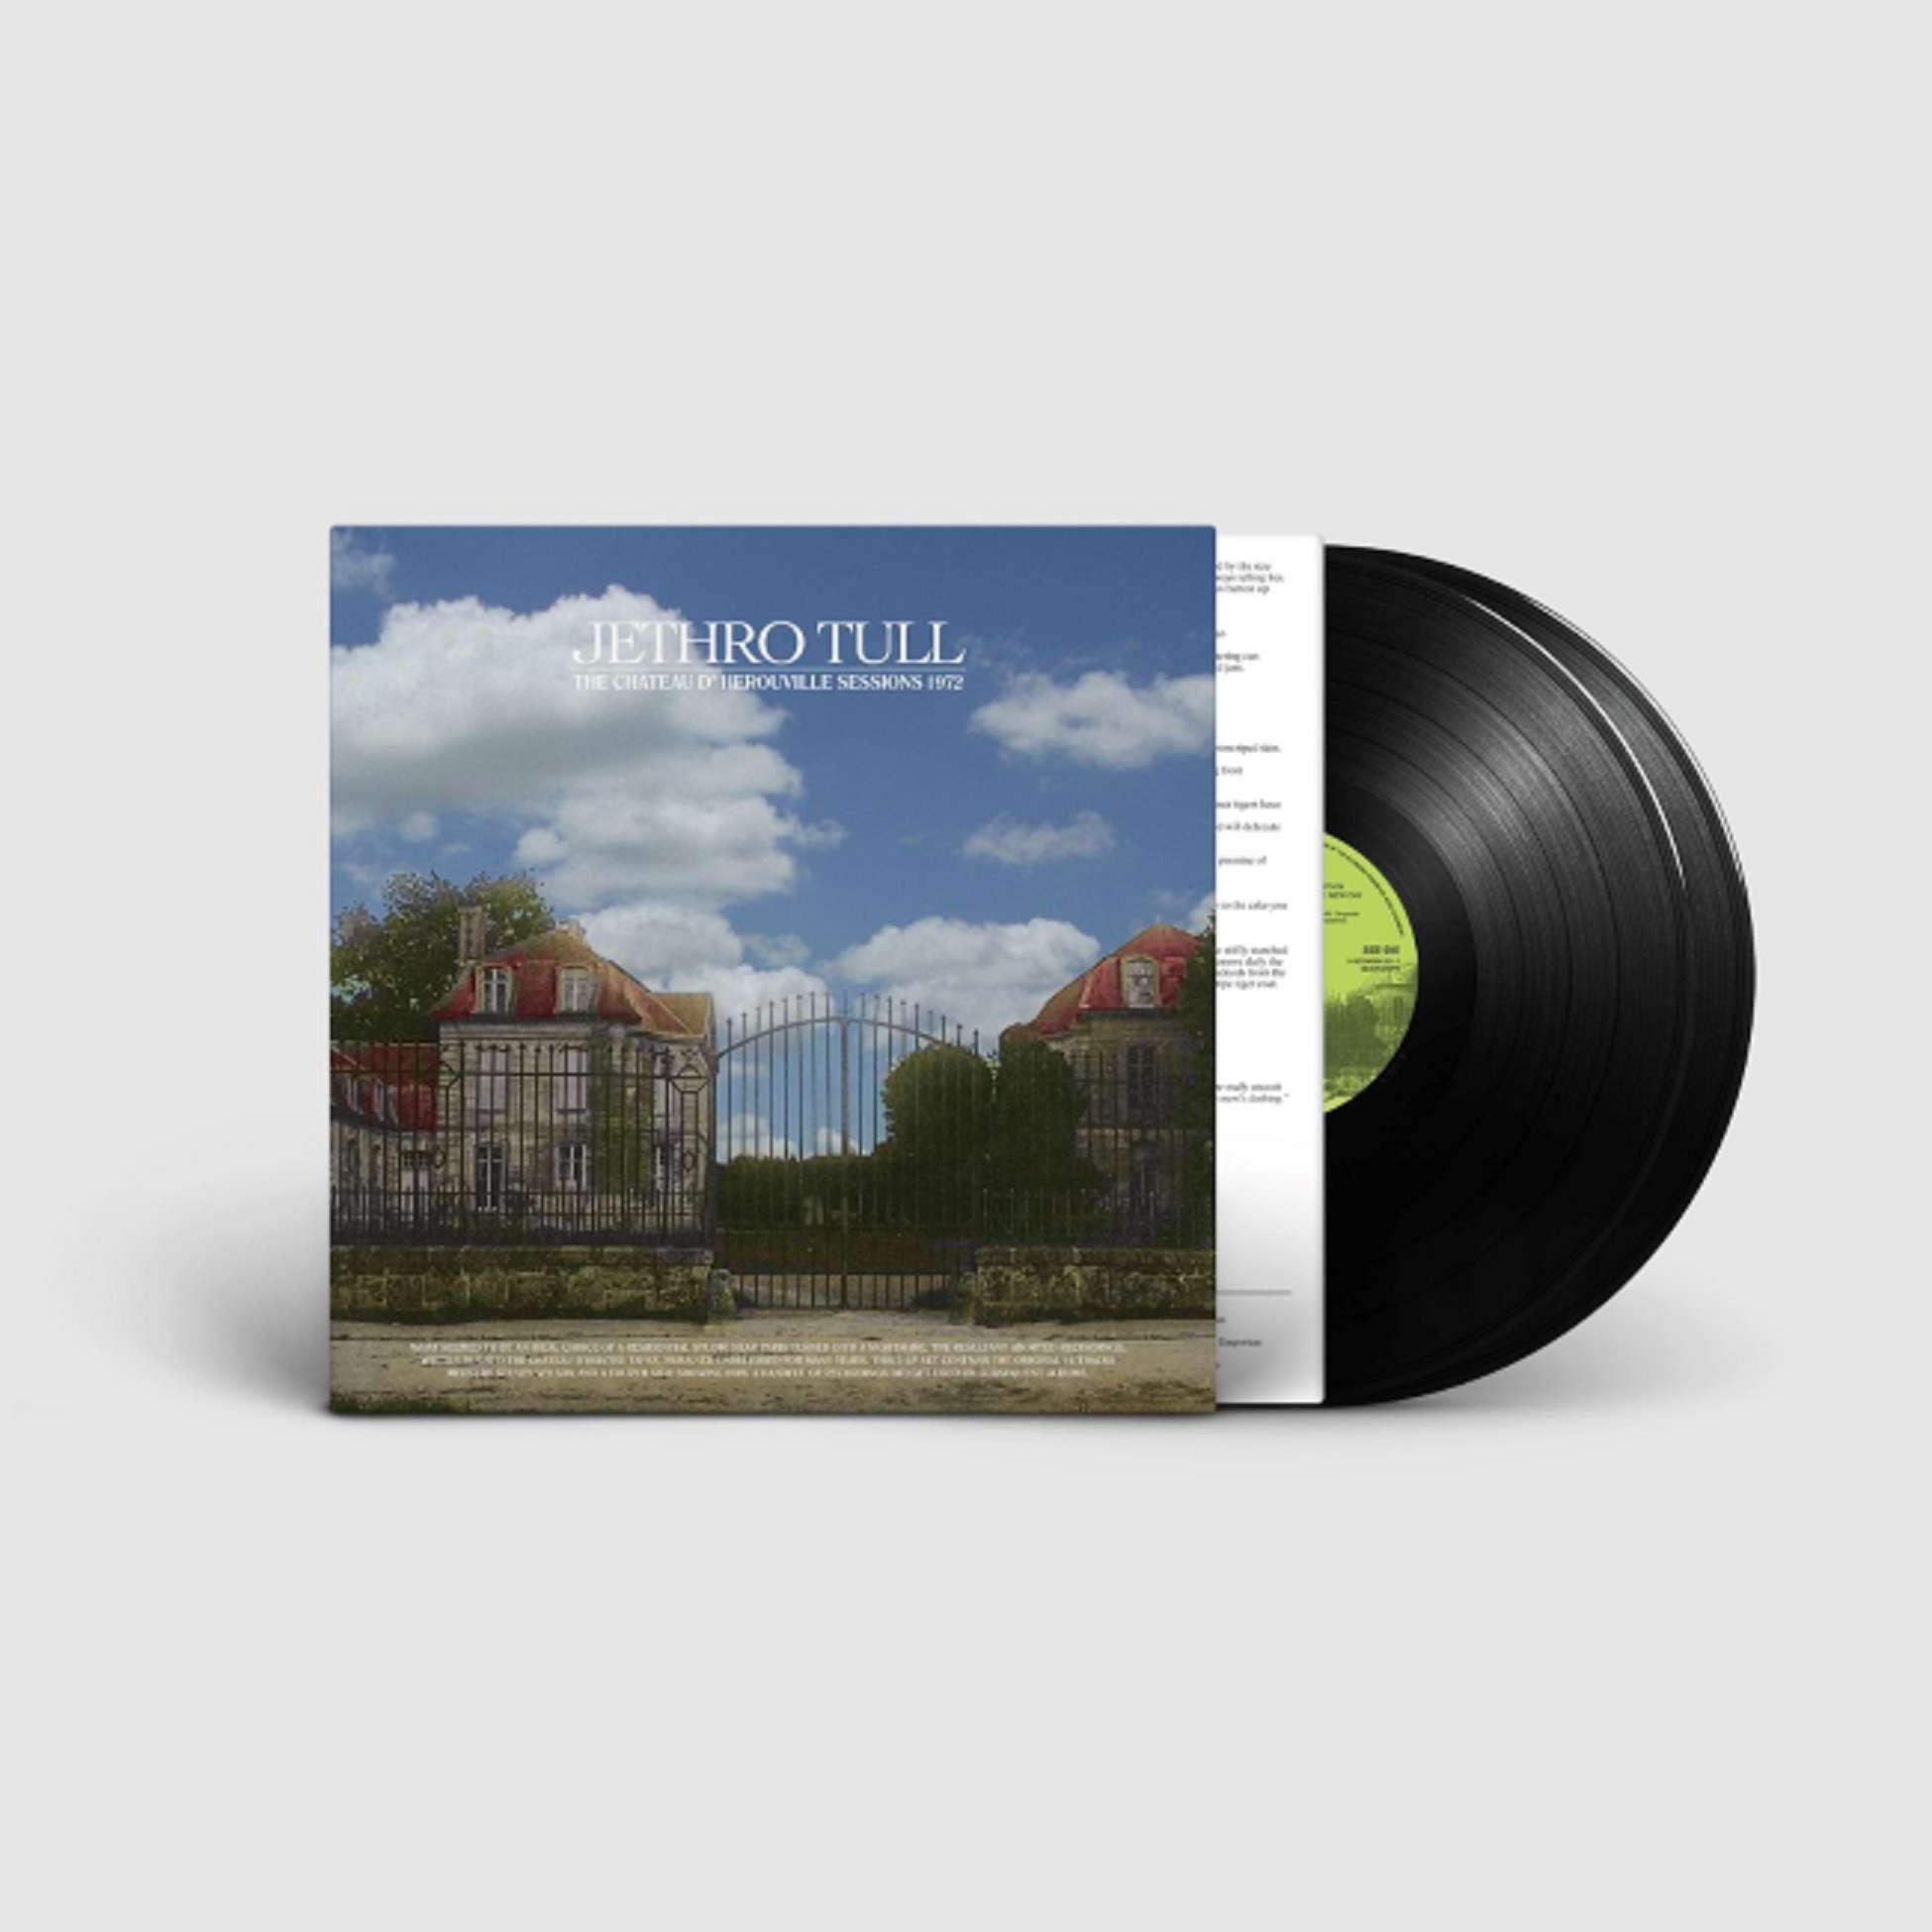 The Château D'Herouville Sessions available on vinyl for the first time